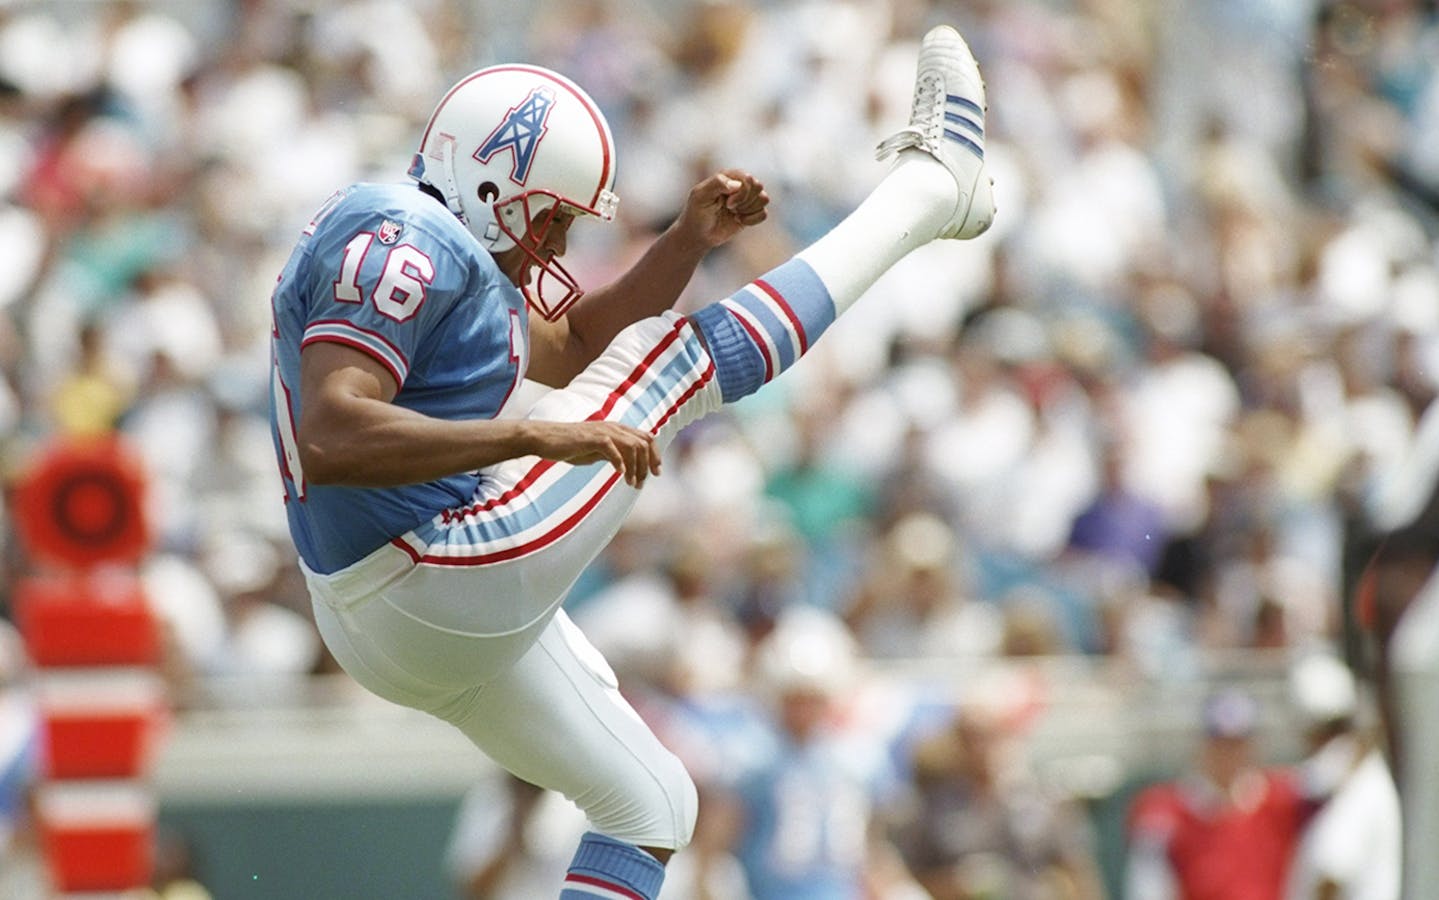 How Tennessee Titans got their Houston Oilers throwback uniforms wrong